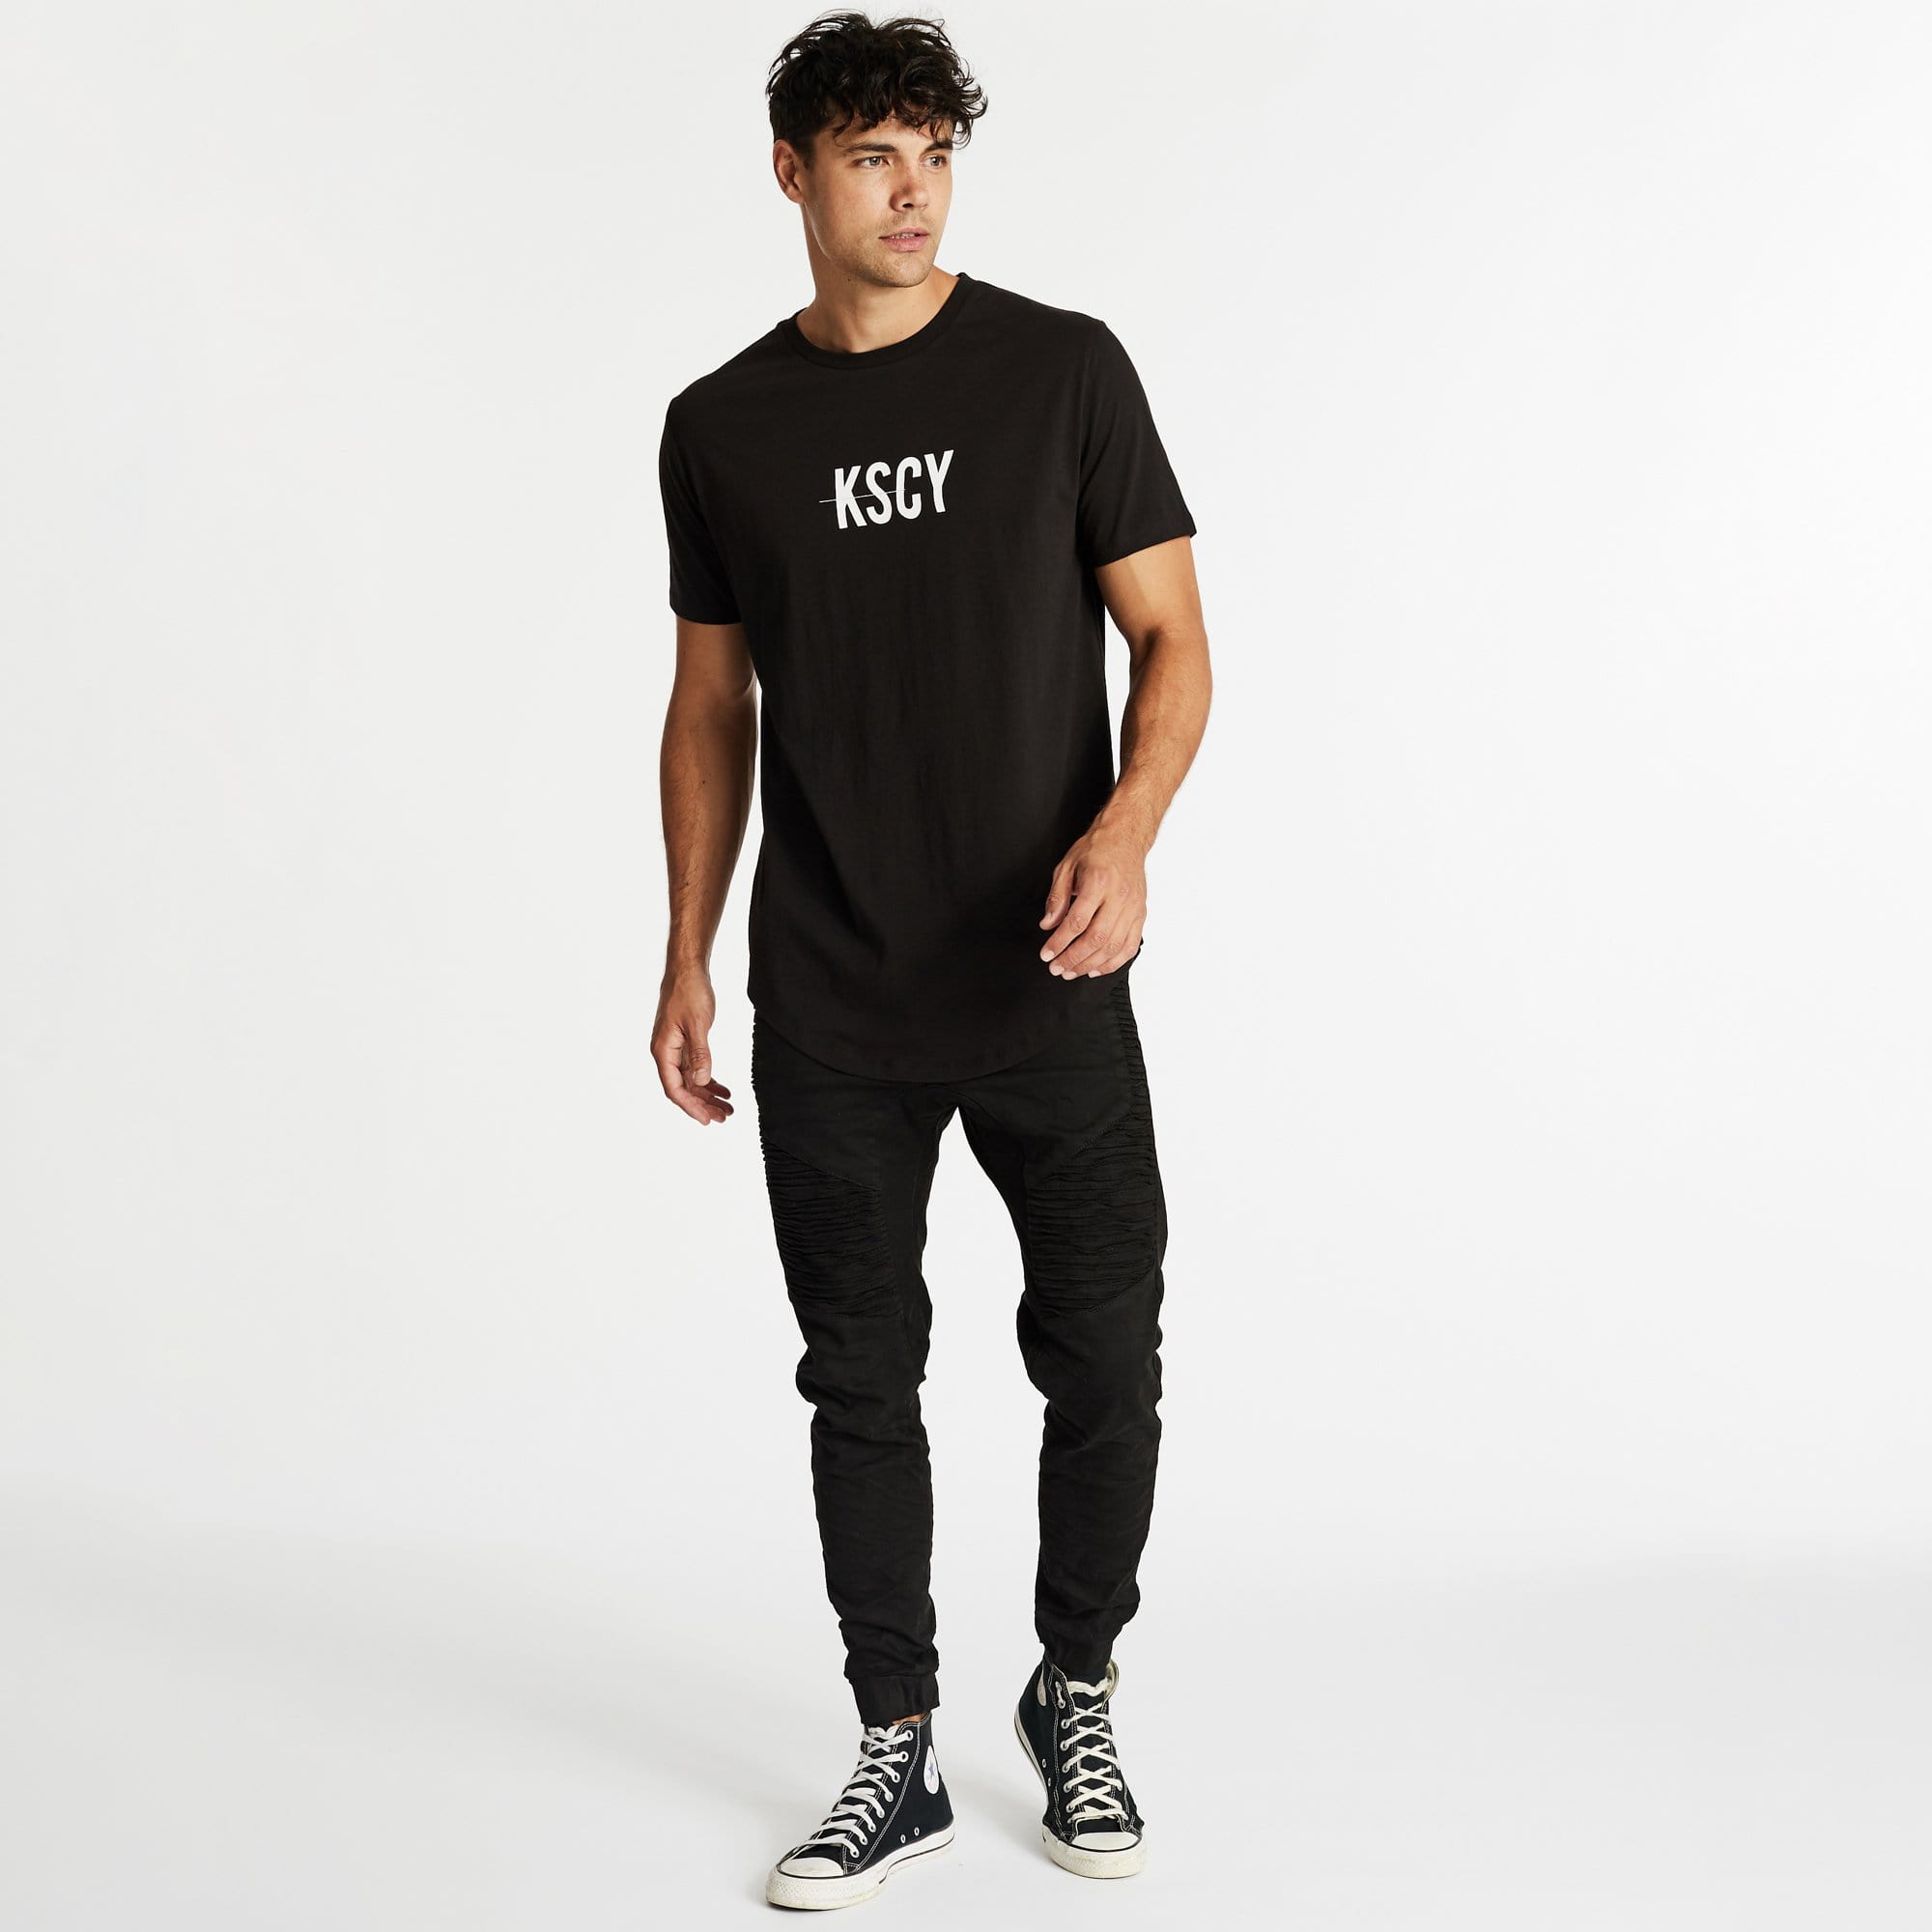 Discovery Dual Curved T-Shirt Jet Black